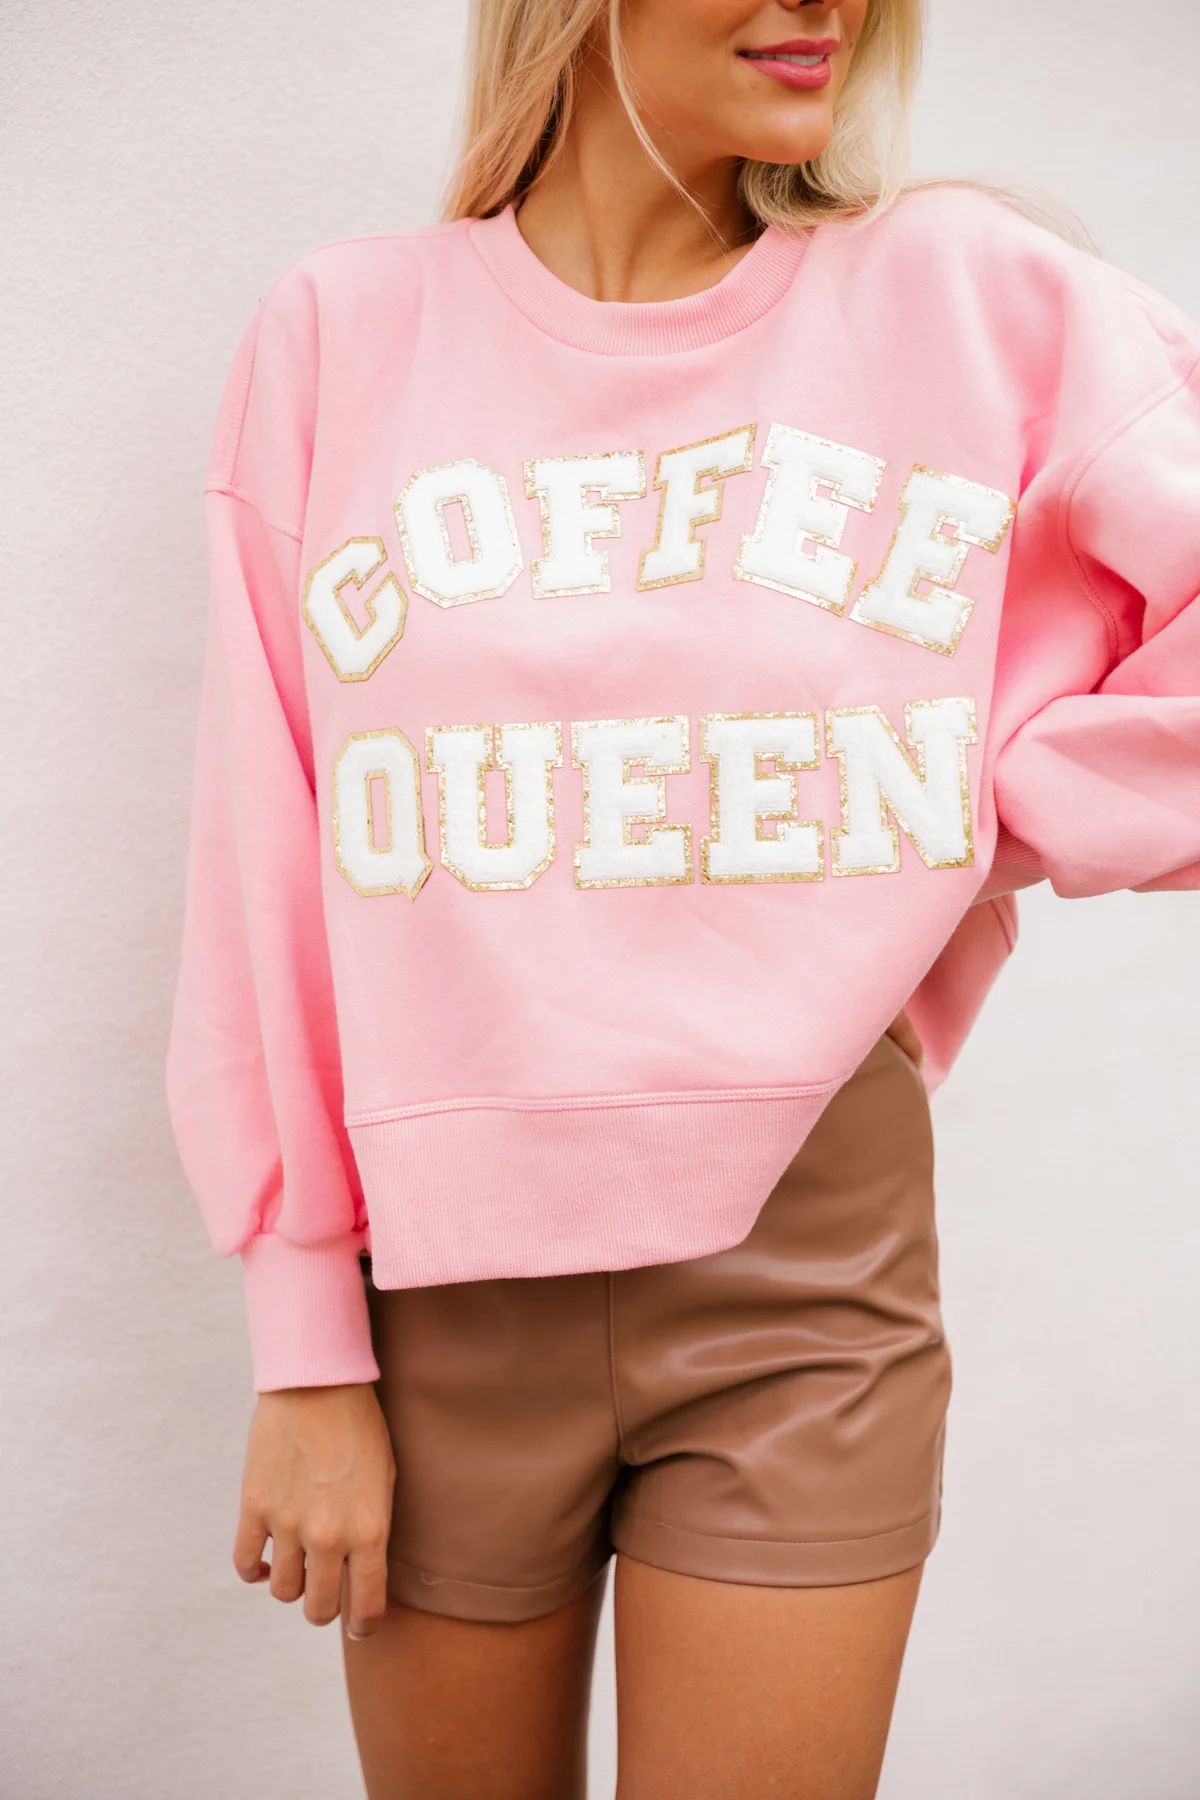 COFFEE QUEEN PULLOVER | Judith March